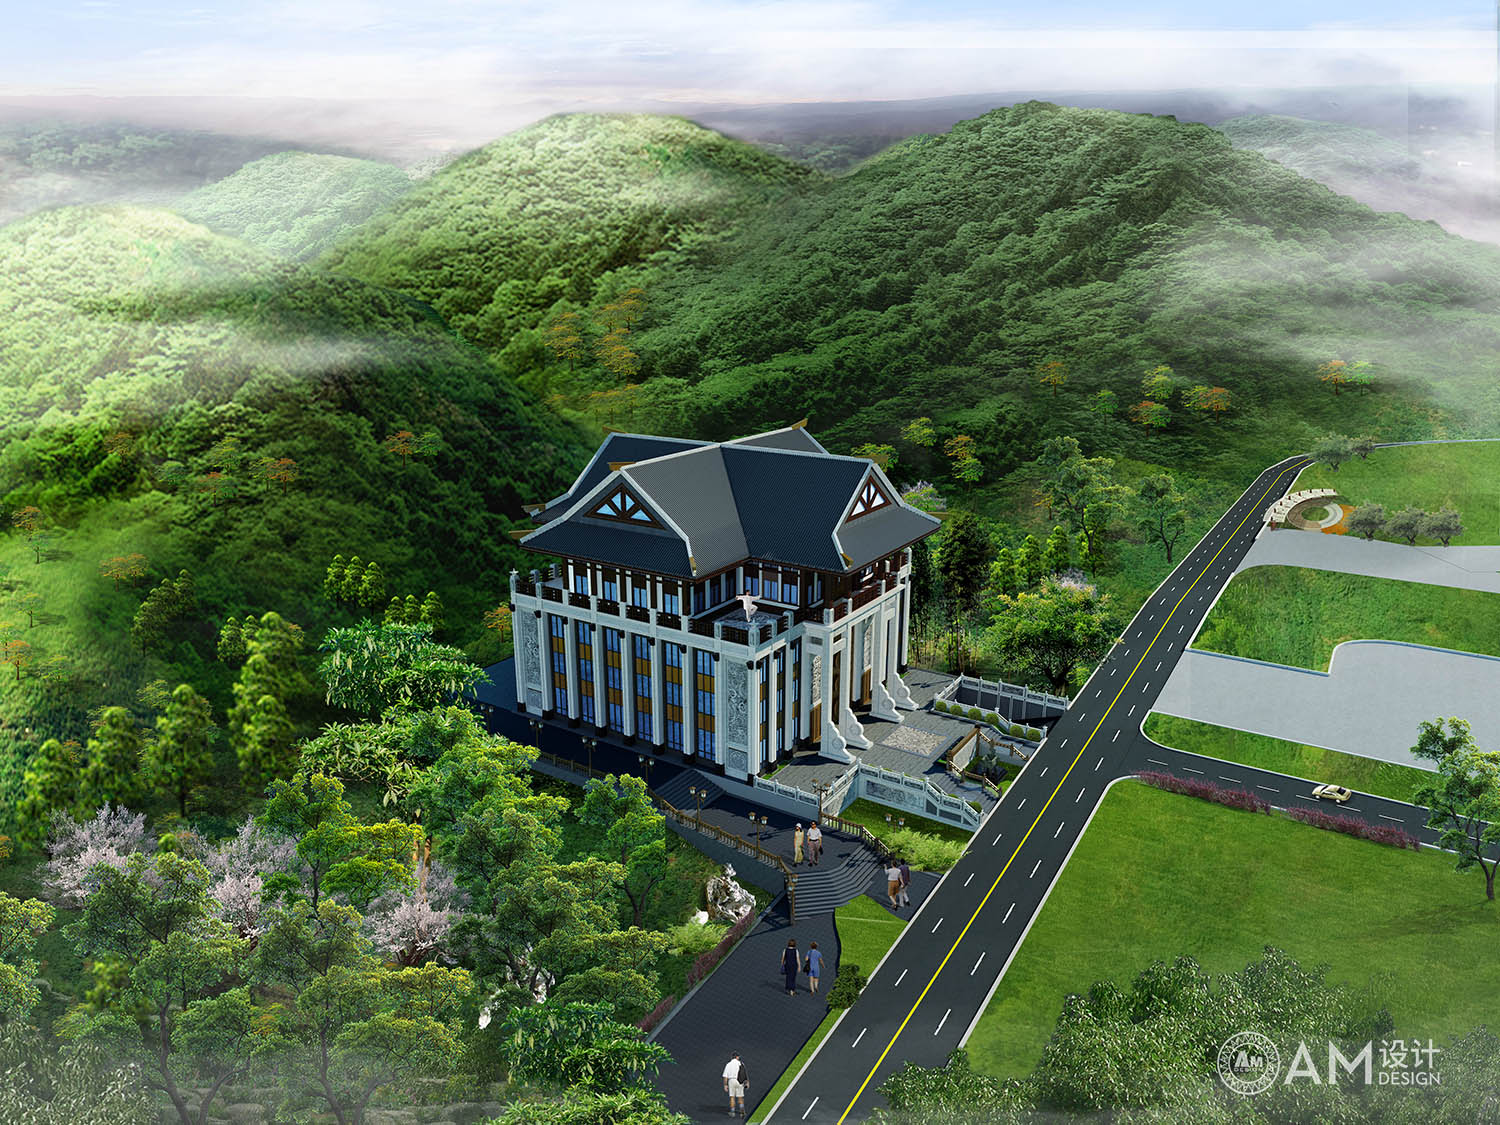 AM DESIGN | Architectural landscape design of Zhengyantang Traditional Chinese Medicine Cultural Center